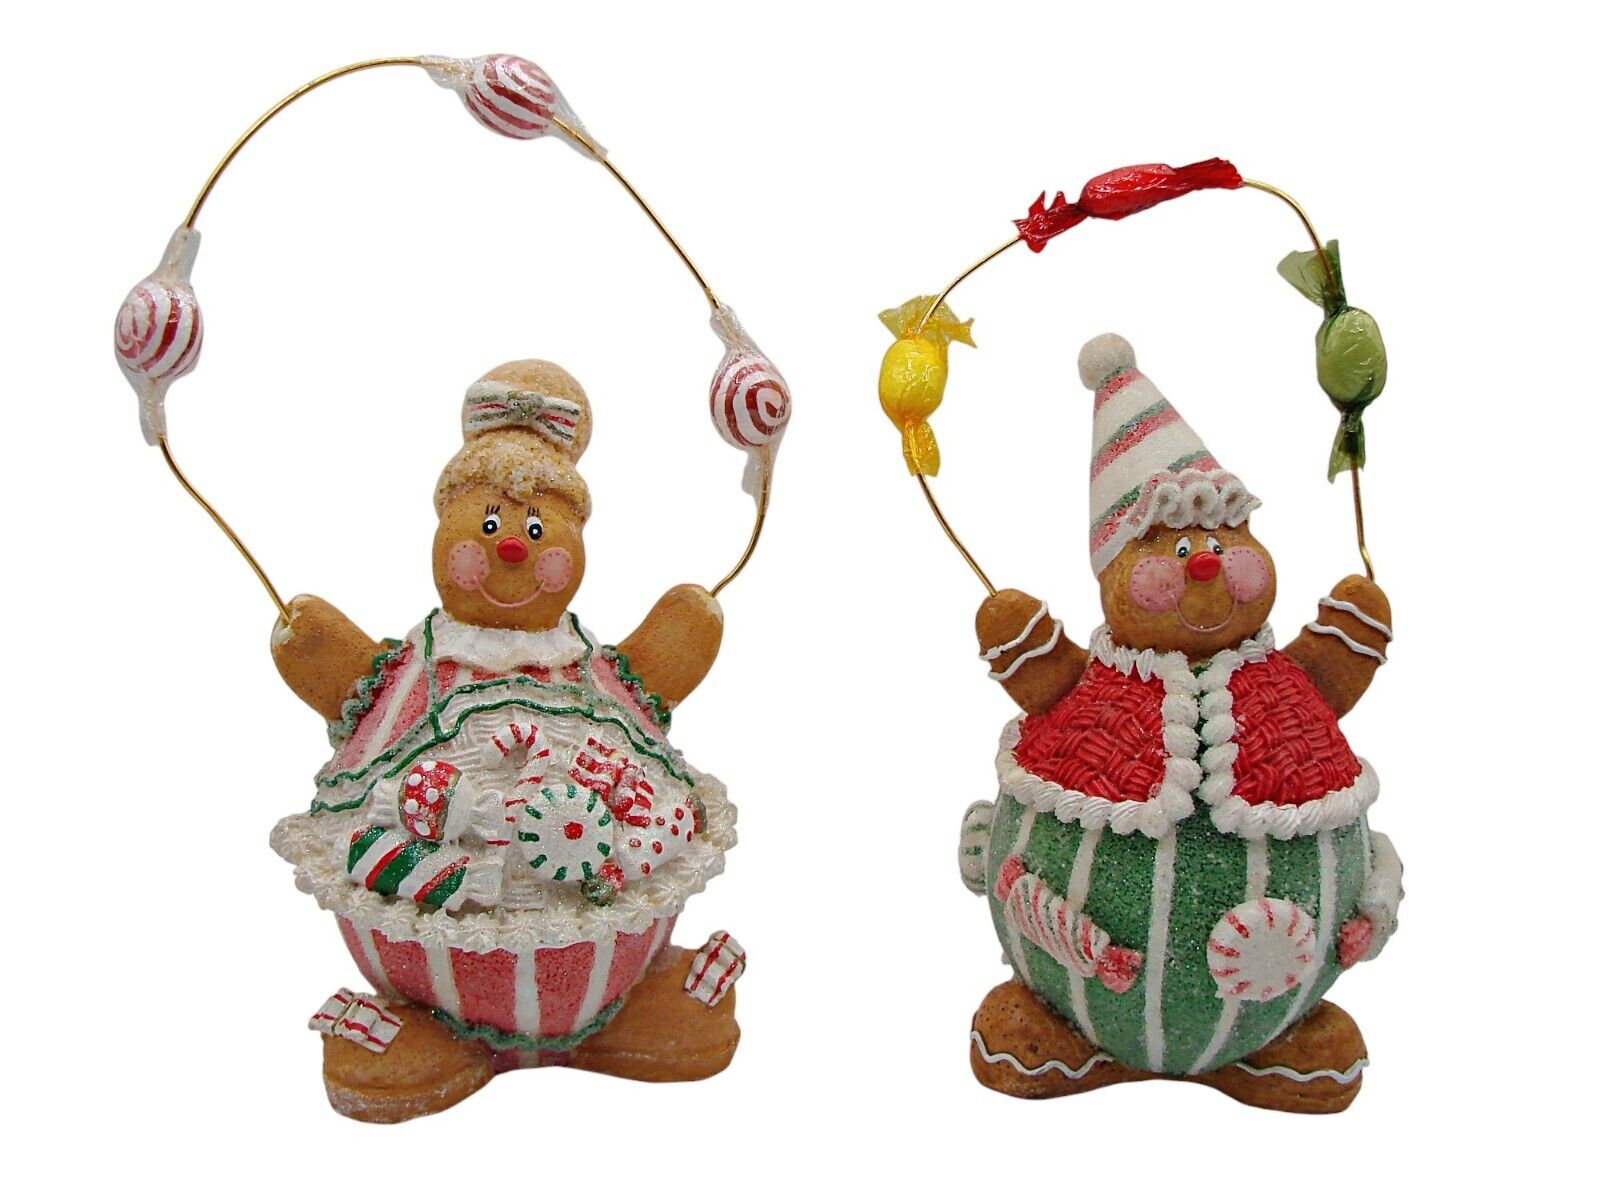 Vintage Gingerbread Christmas Holiday Figurines Polystyrene Candy Glitter Sugar